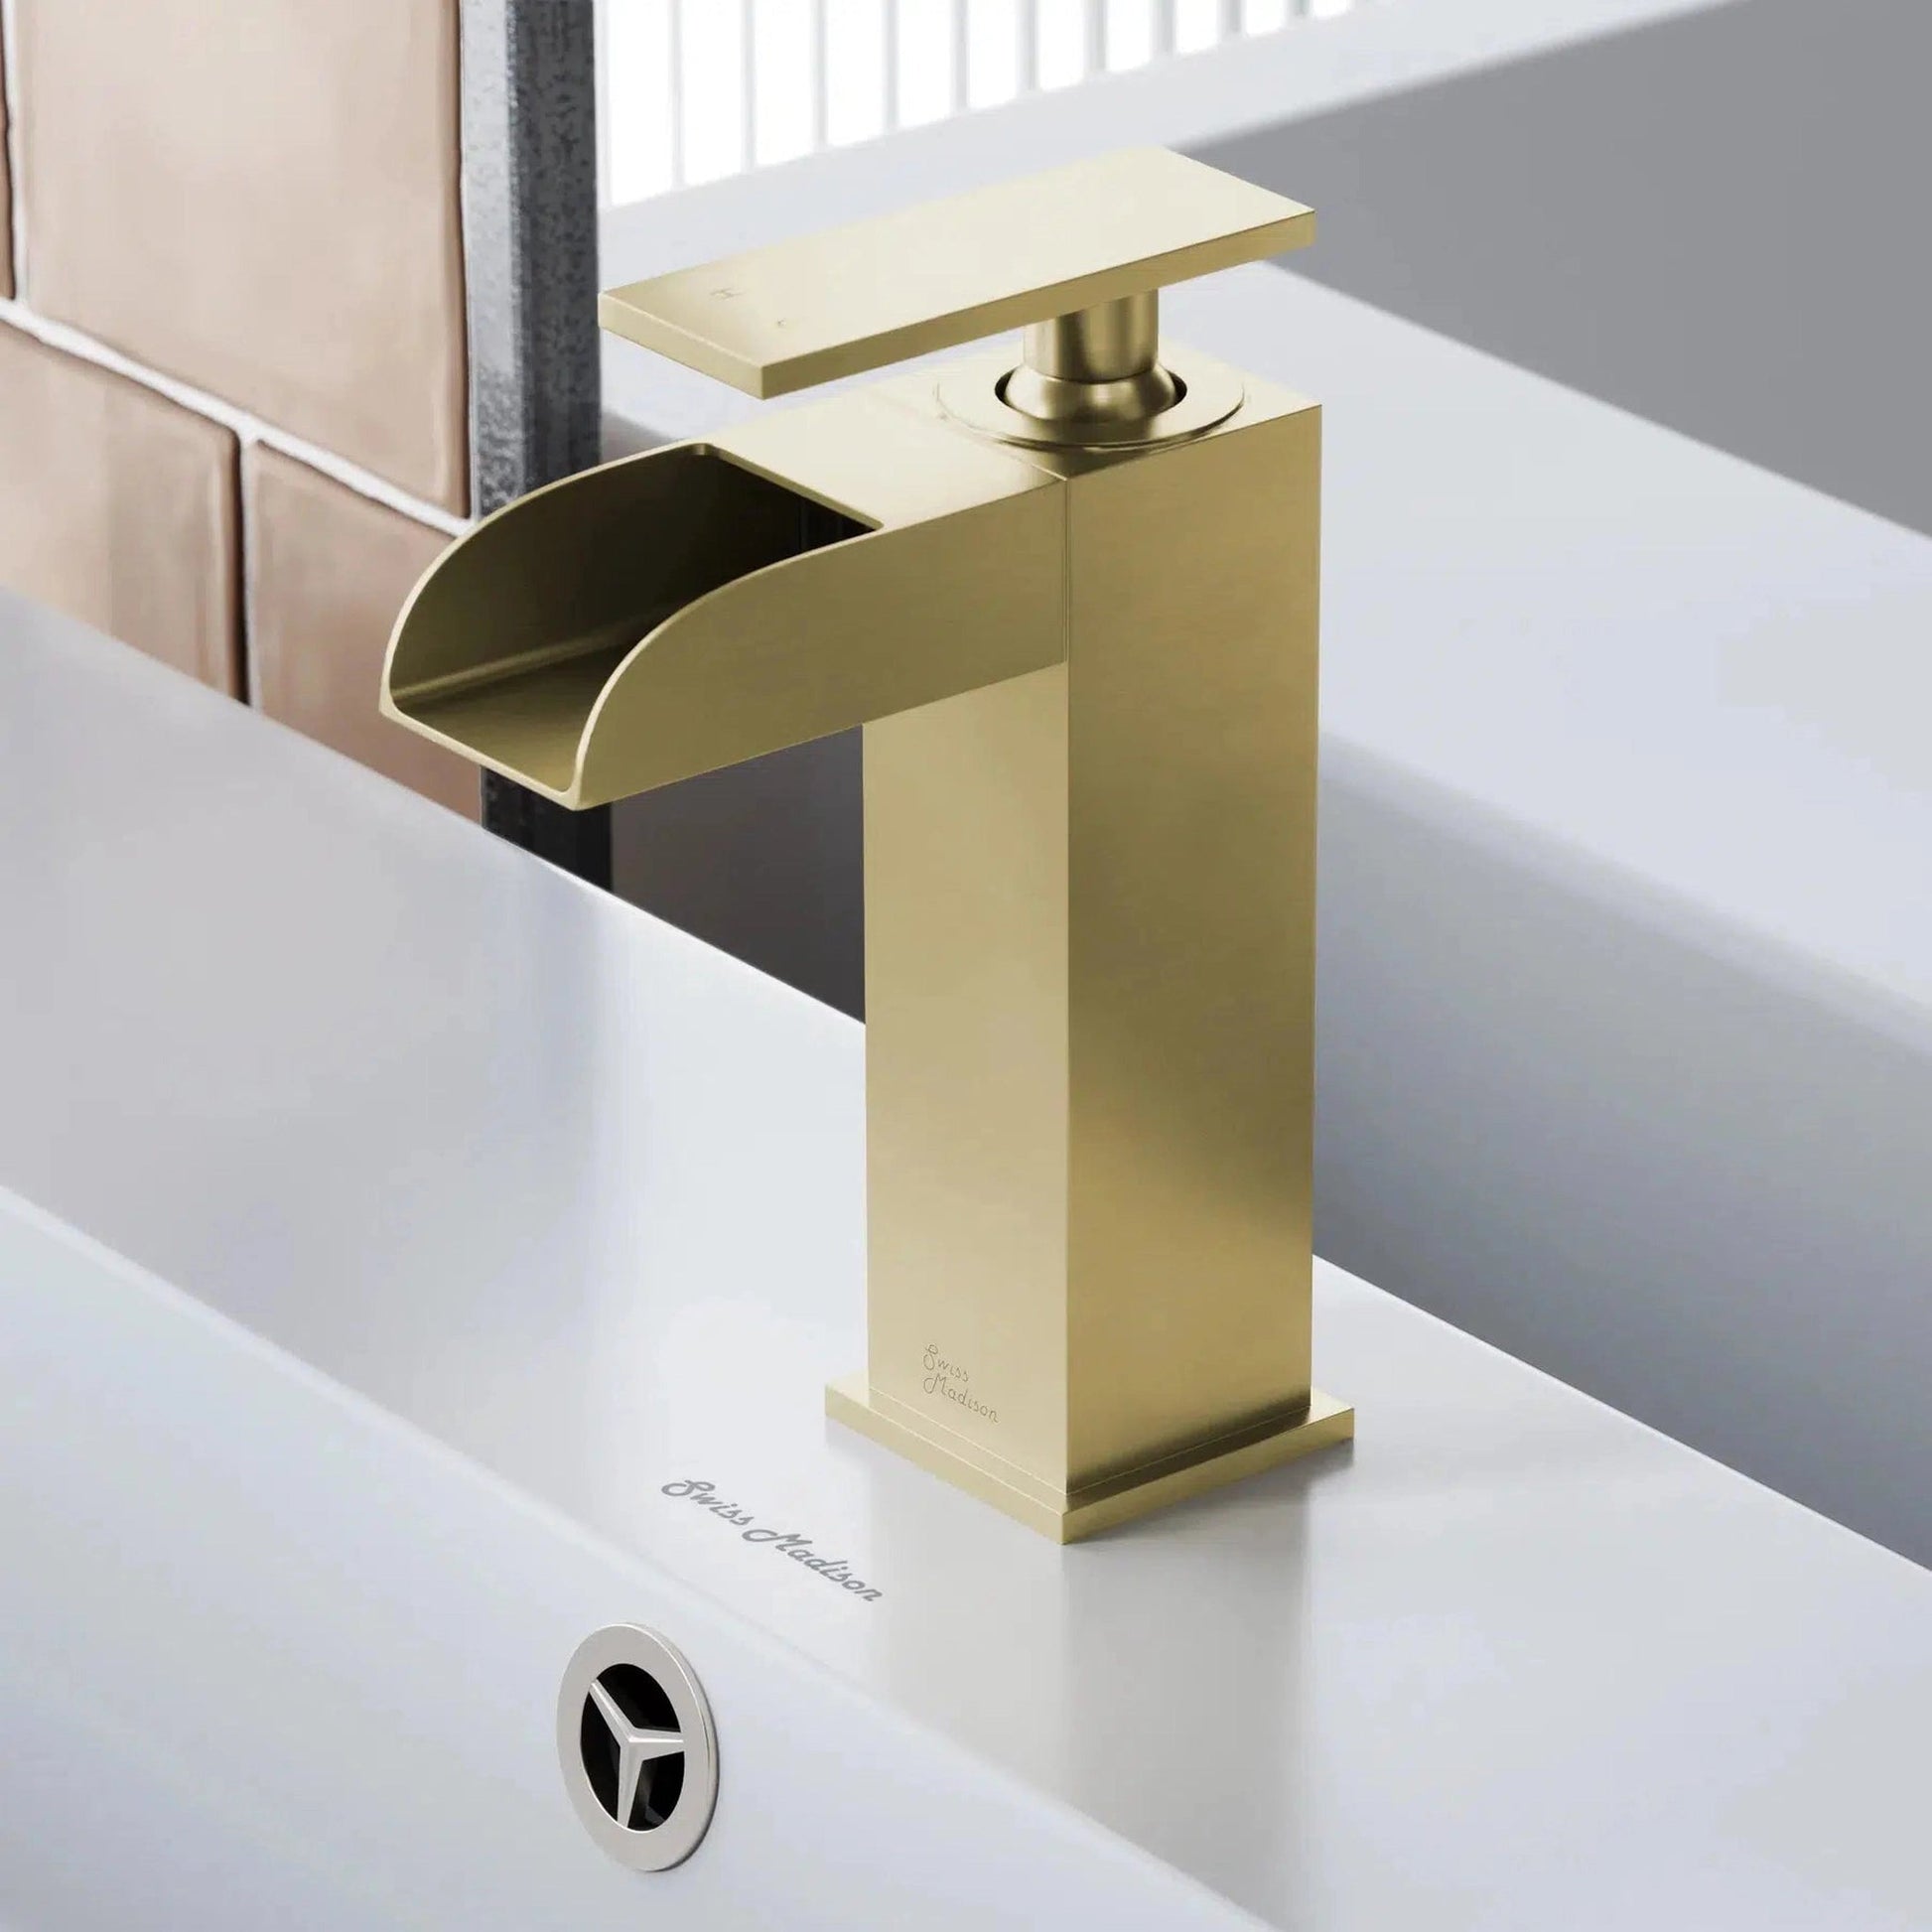 Swiss Madison Concorde 7" Single-Handle Brushed Gold Waterfall Bathroom Faucet With 1.2 GPM Flow Rate